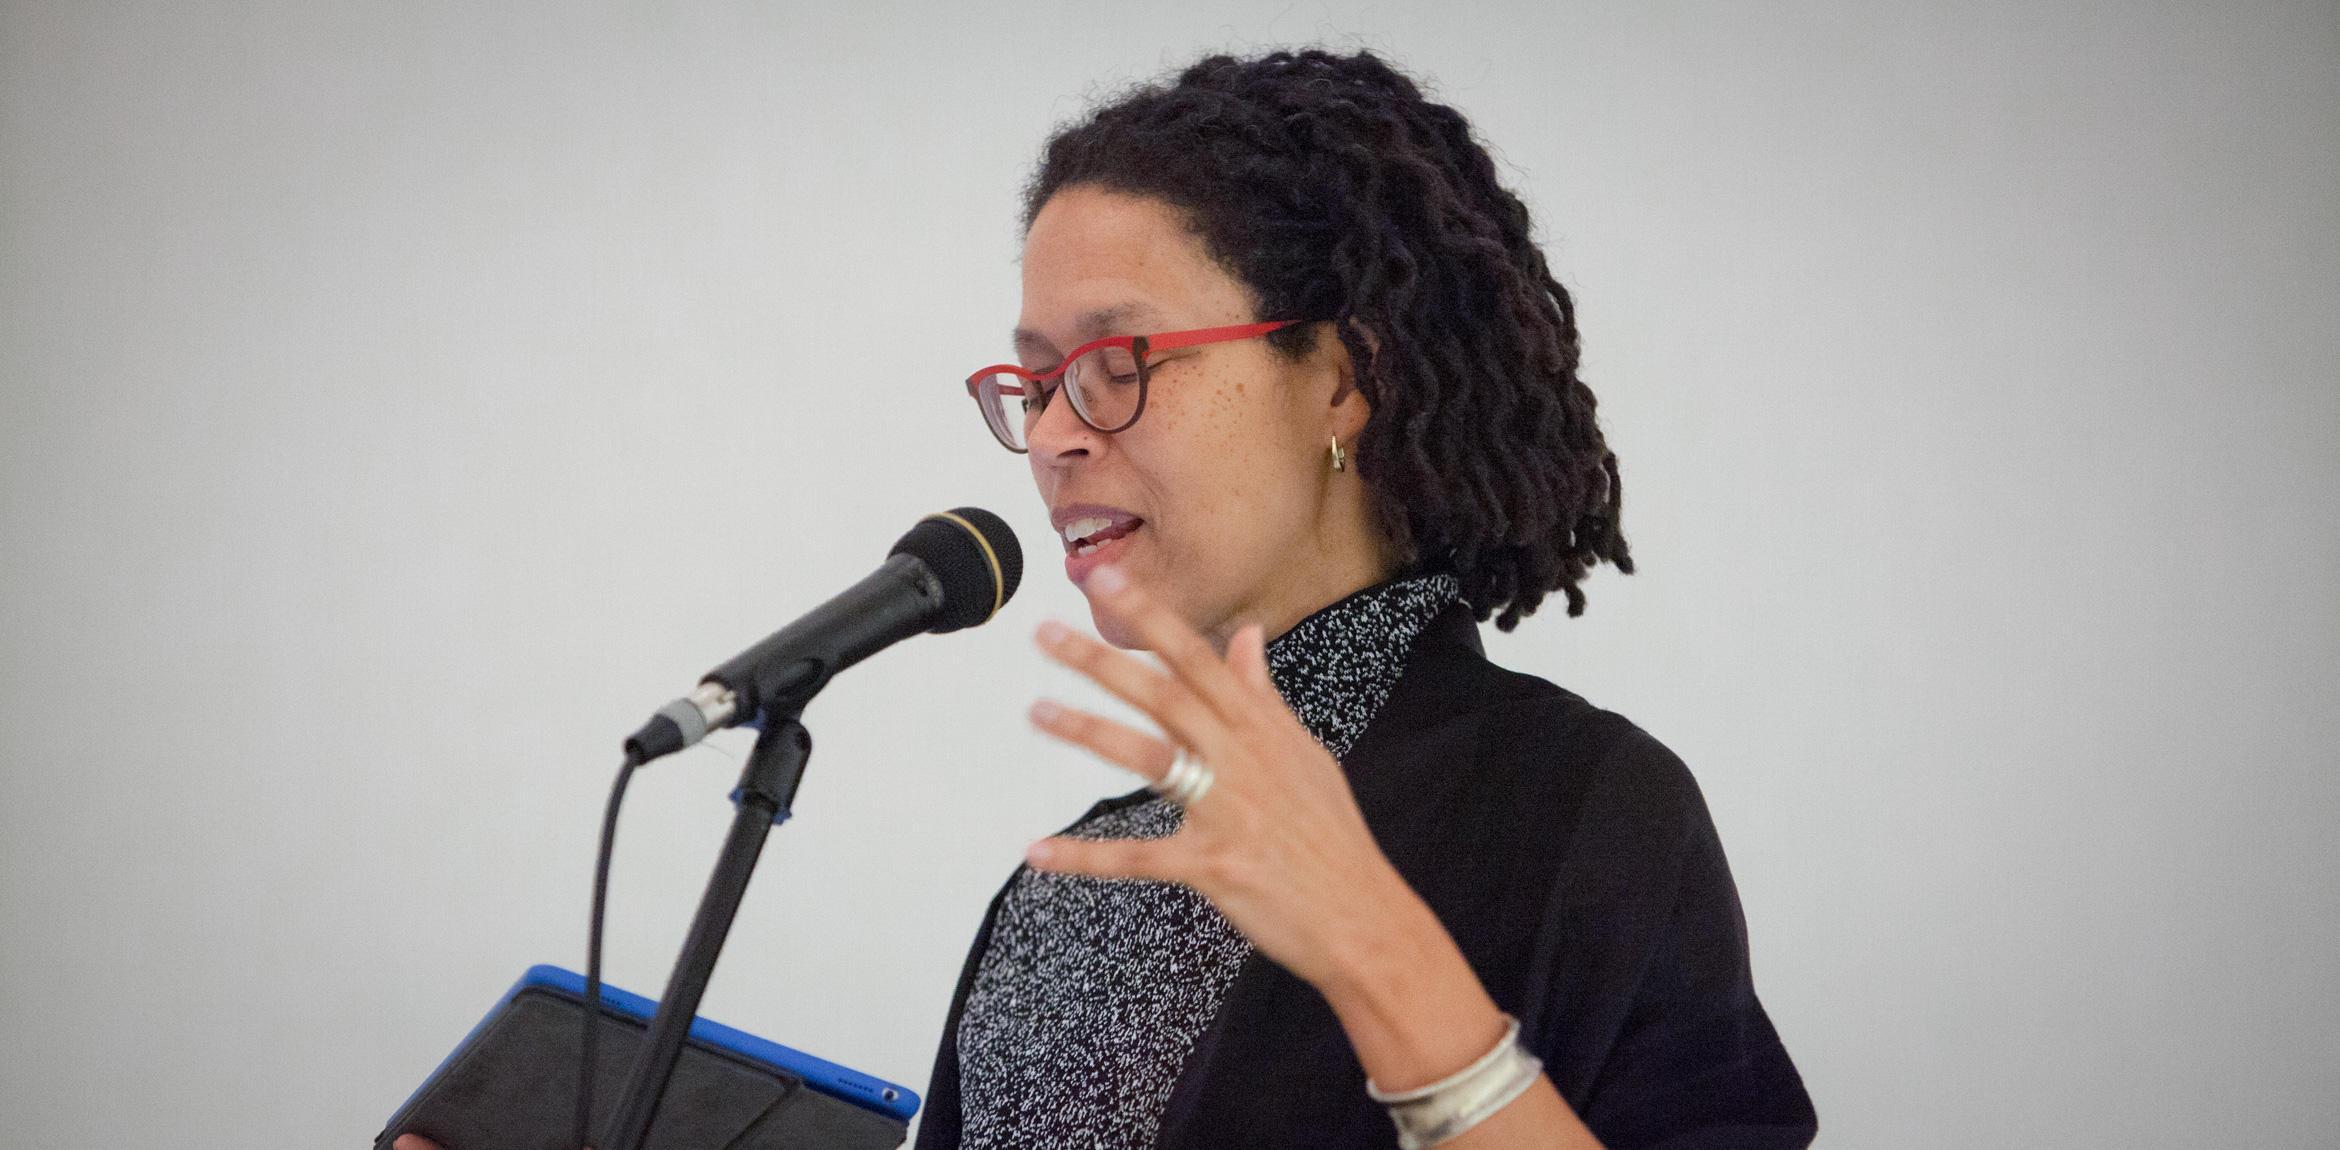 Poet Evie Shockley reads into a microphone.